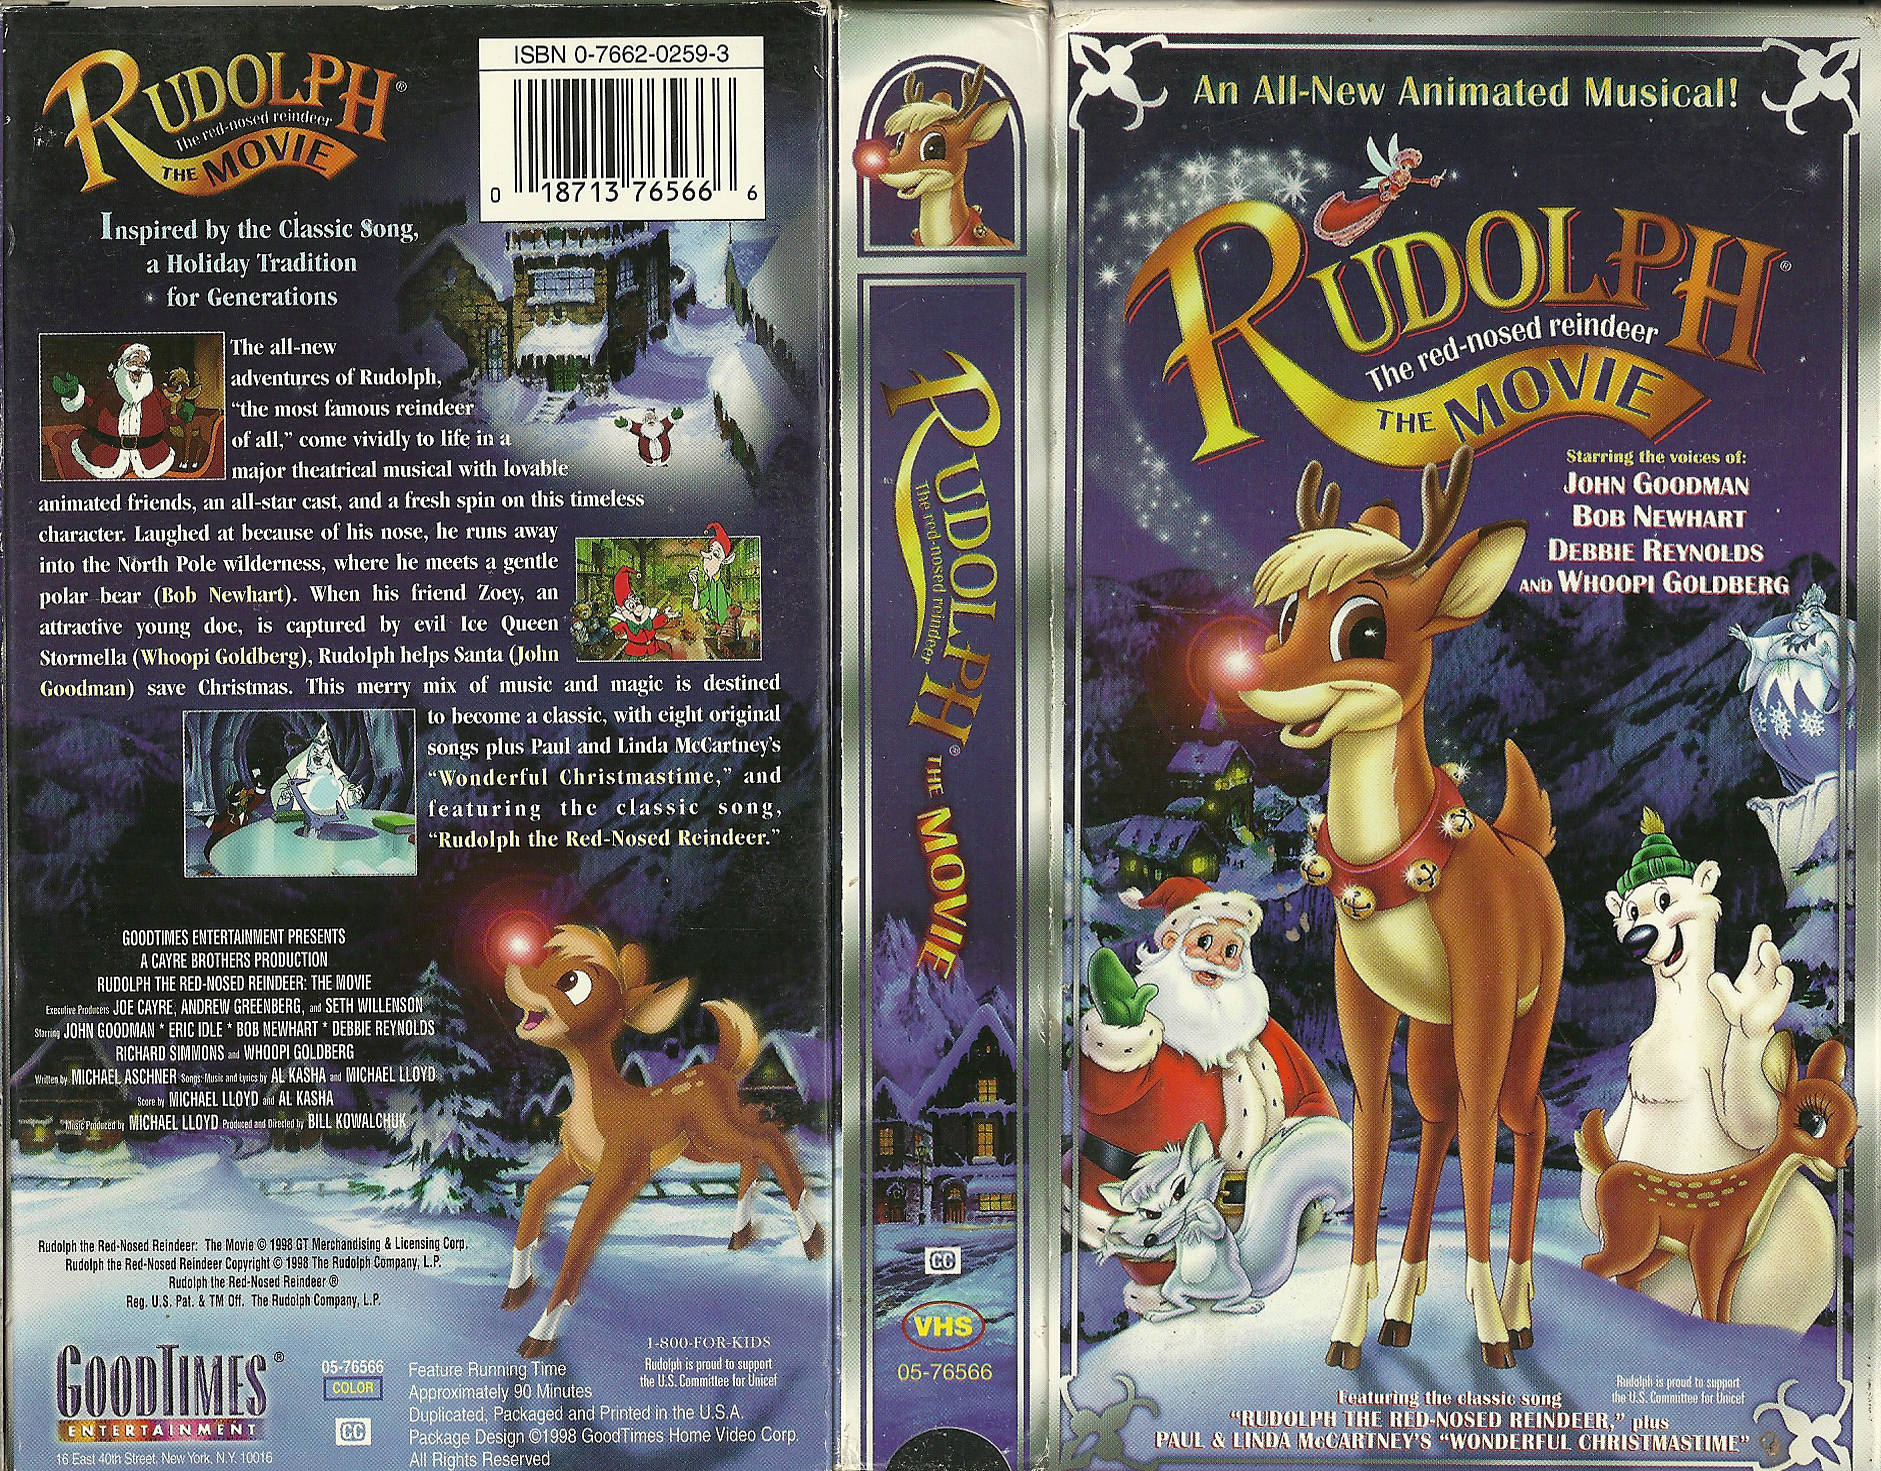 Rudolph The Red-Nosed Reindeer: The Movie #8